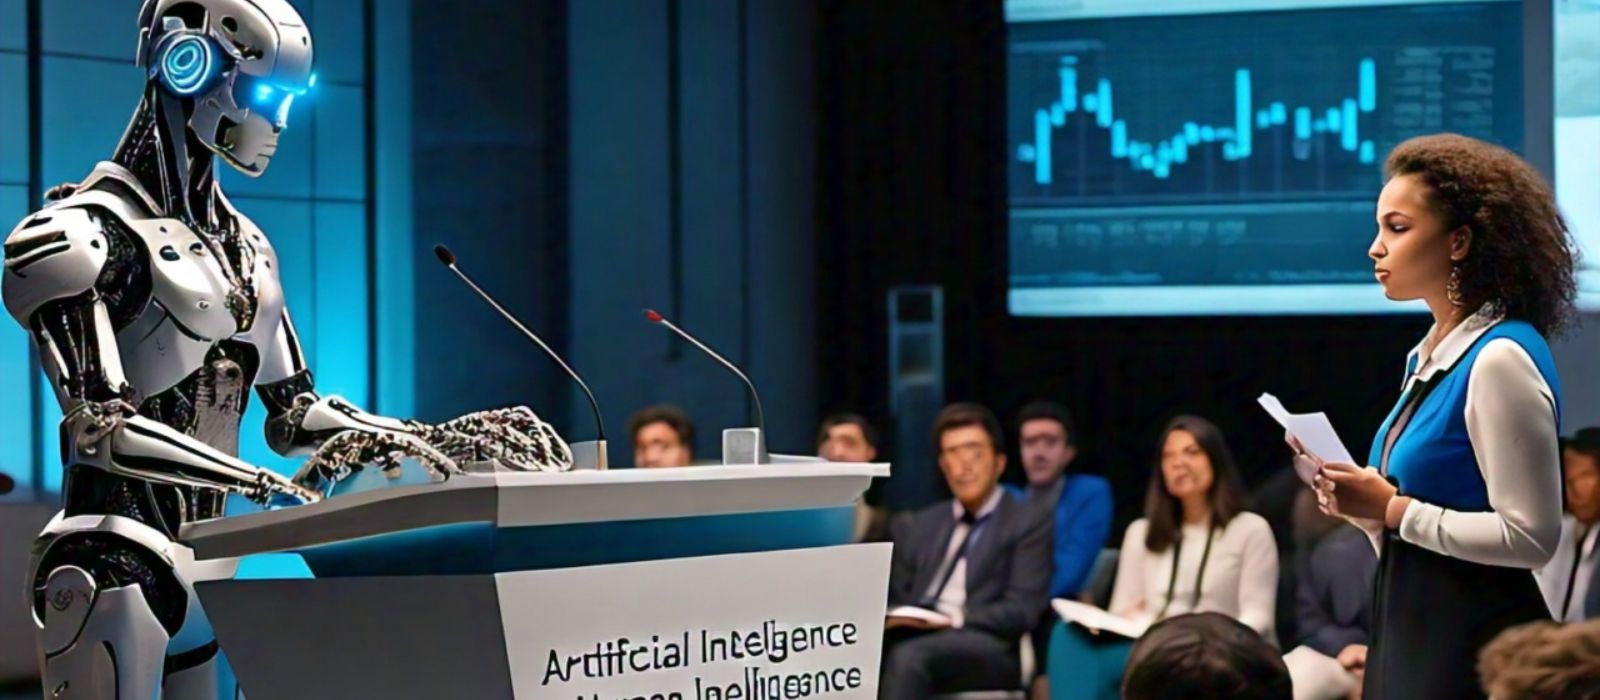 Will Artificial Intelligence replace Human Intelligence?